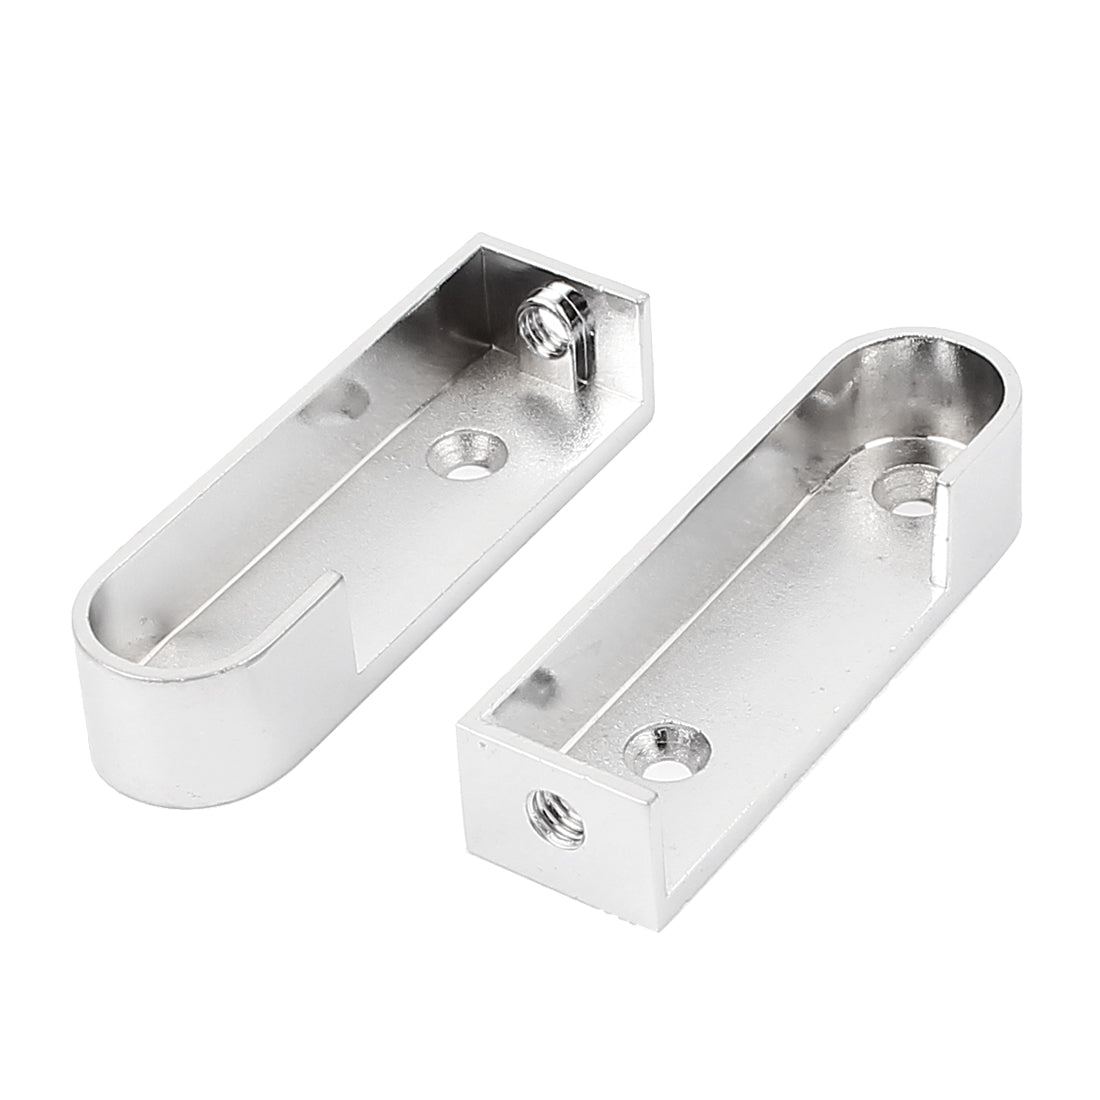 uxcell Uxcell Wardrobe Hanging Rail End Socket Bracket Support Fitting Silver Tone Pair